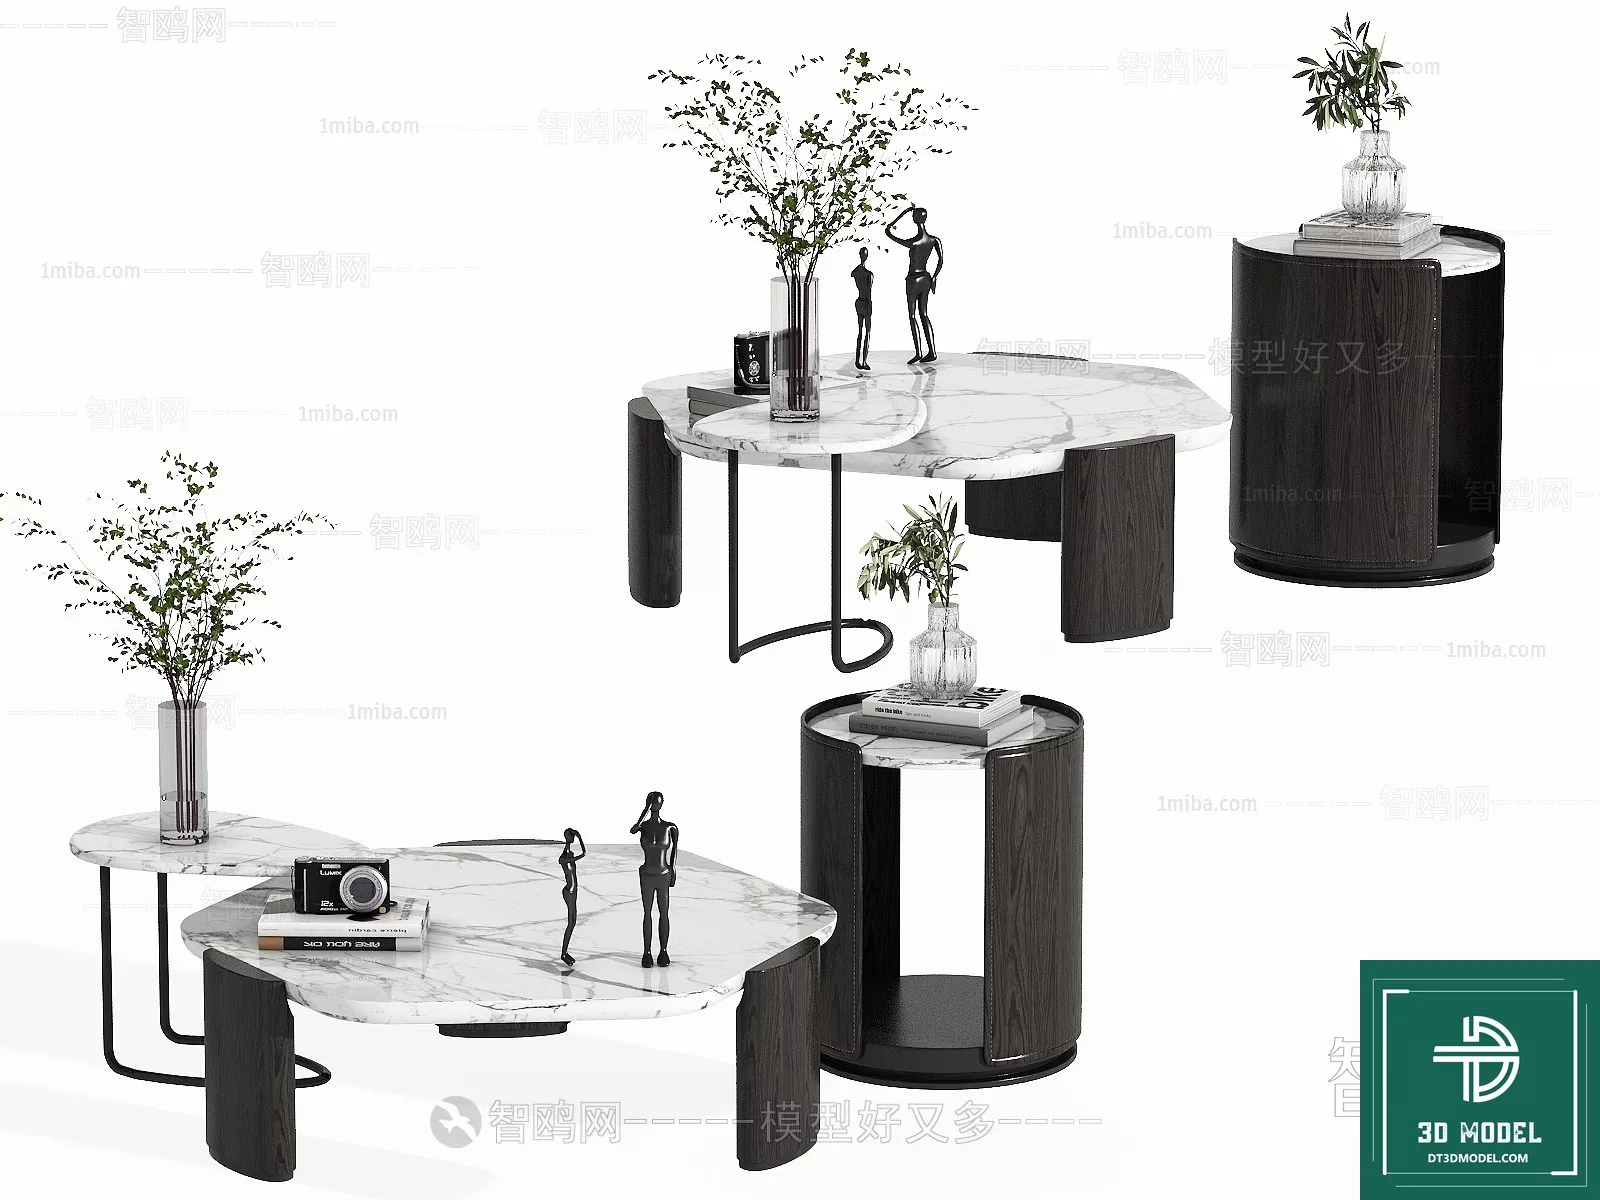 MODERN TEA TABLE - SKETCHUP 3D MODEL - VRAY OR ENSCAPE - ID14980